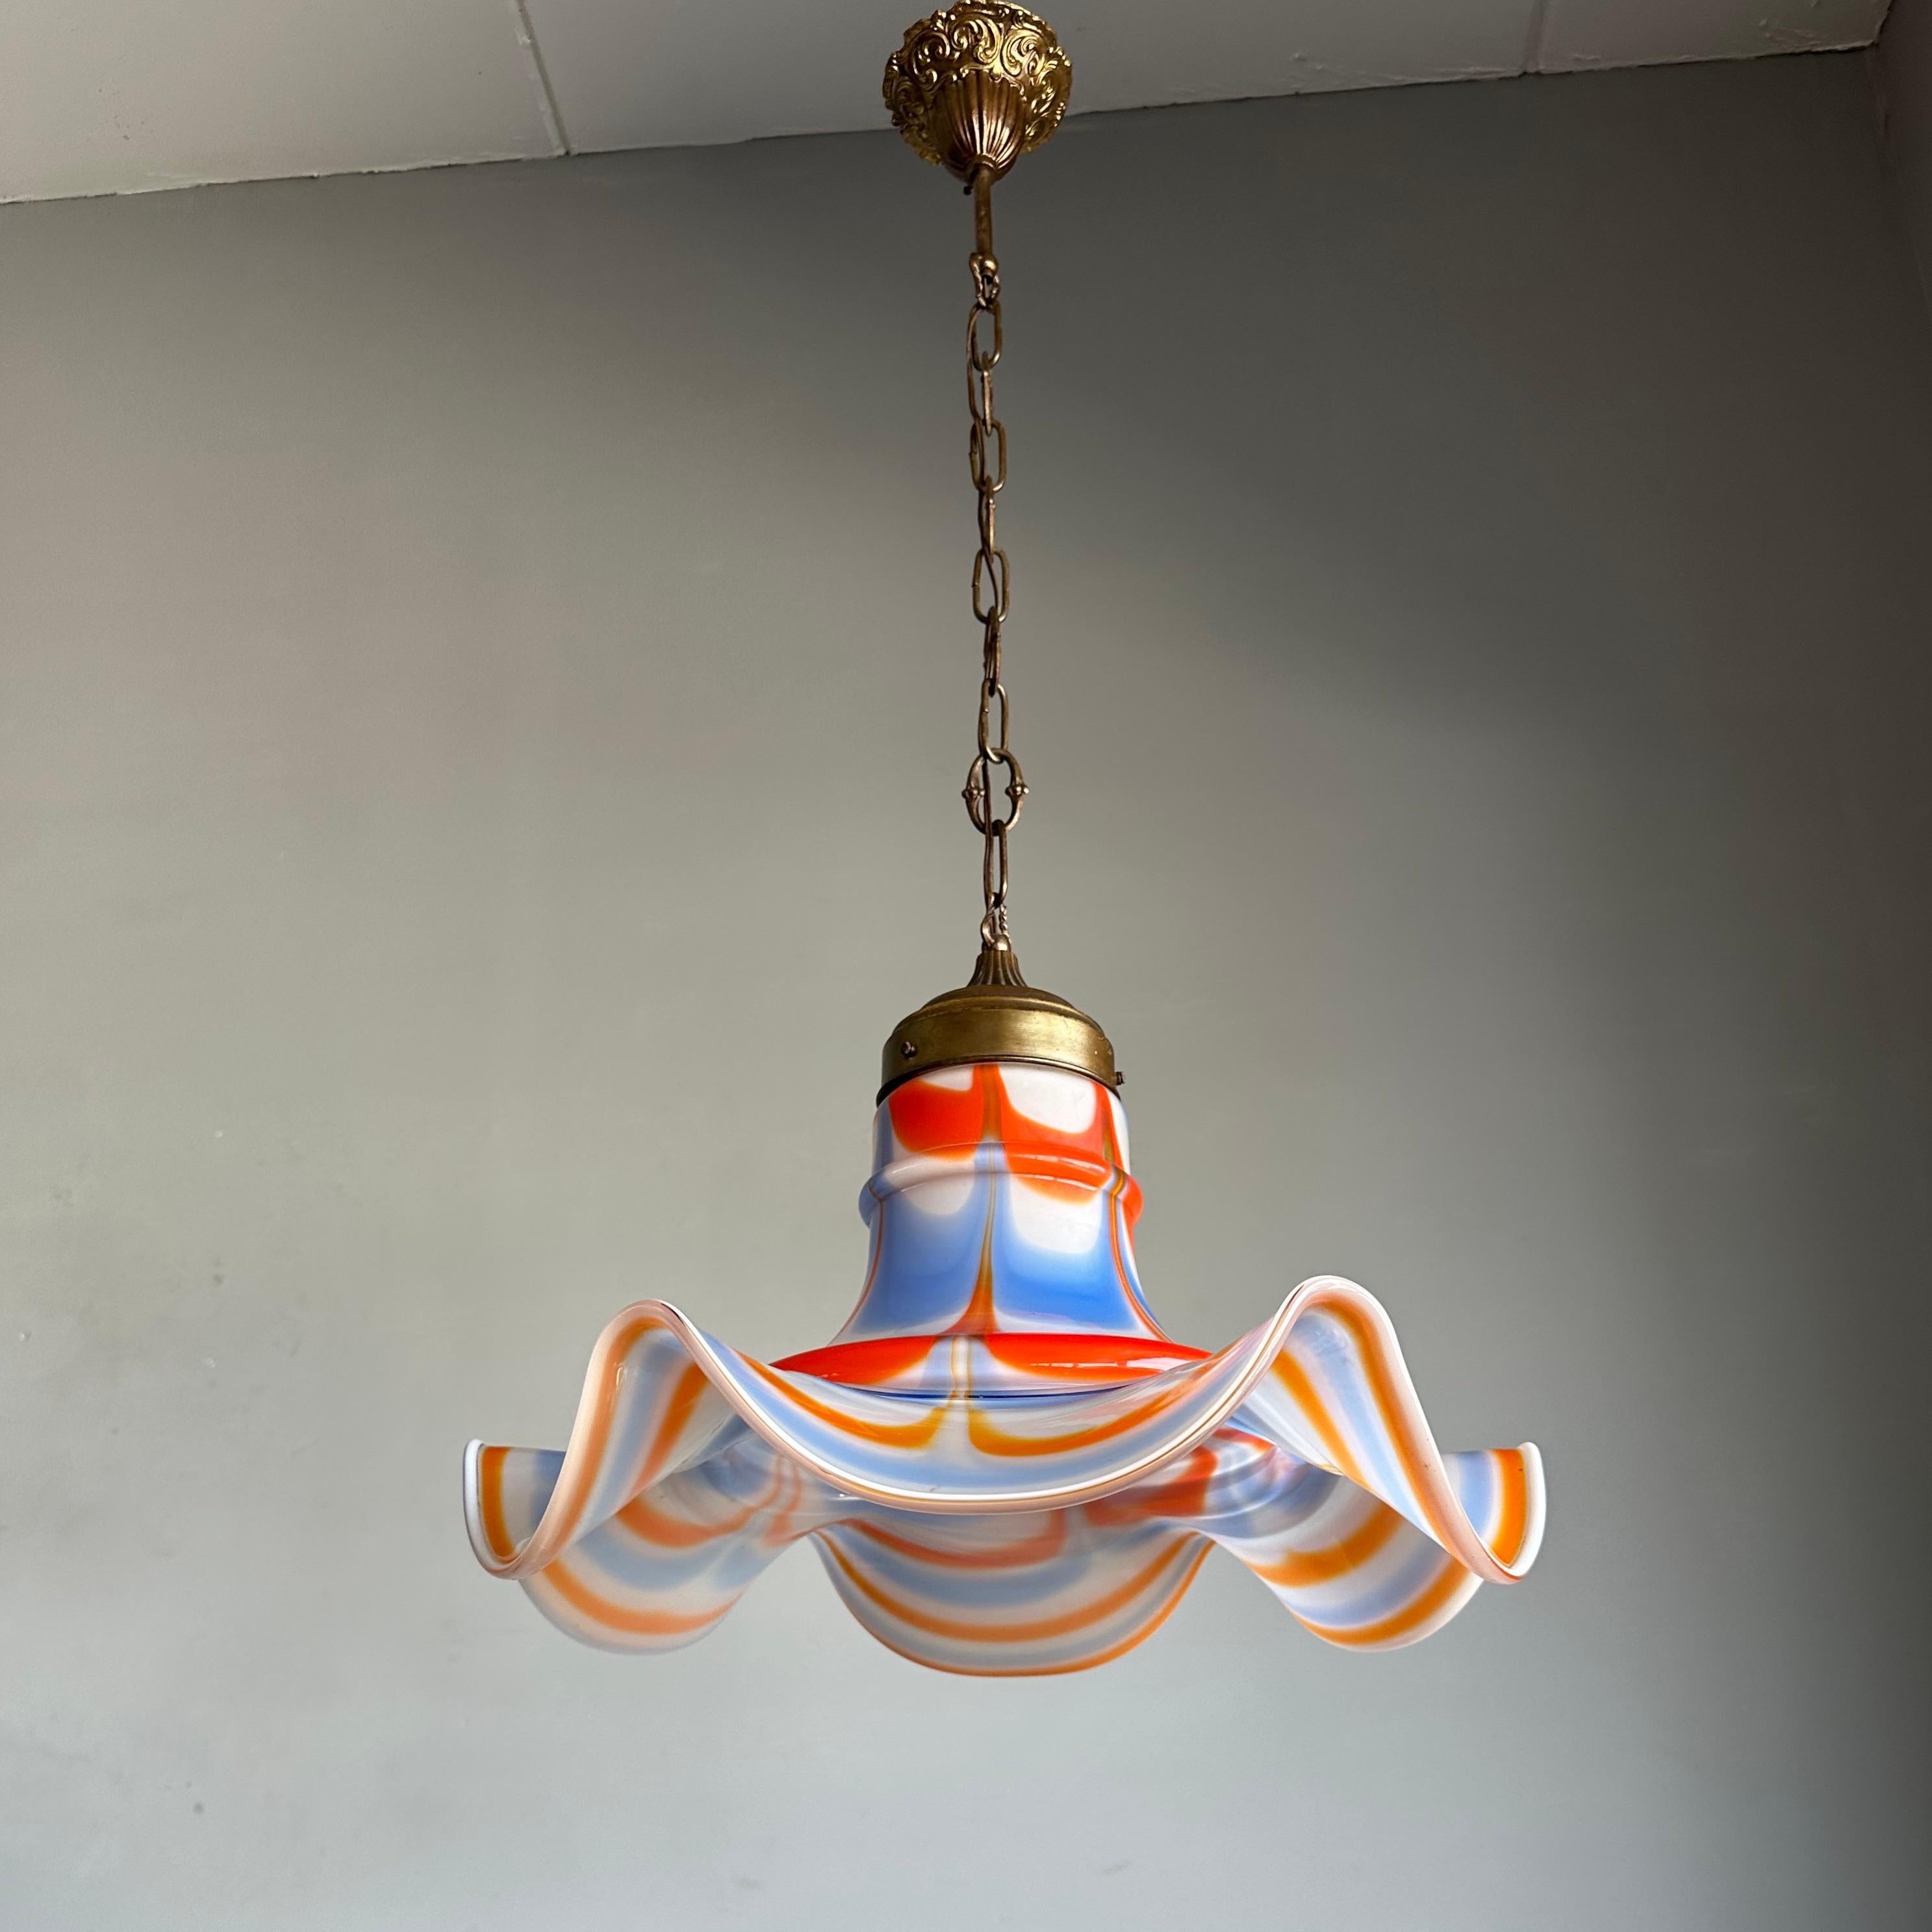 A one-of-a-kind and midcentury mouthblown, glass light fixture.

This elegant Murano glass pendant from the 1950s is a truly exquisite lighting statement and she is in good original condition. If you are looking for a pendant to bring some extra